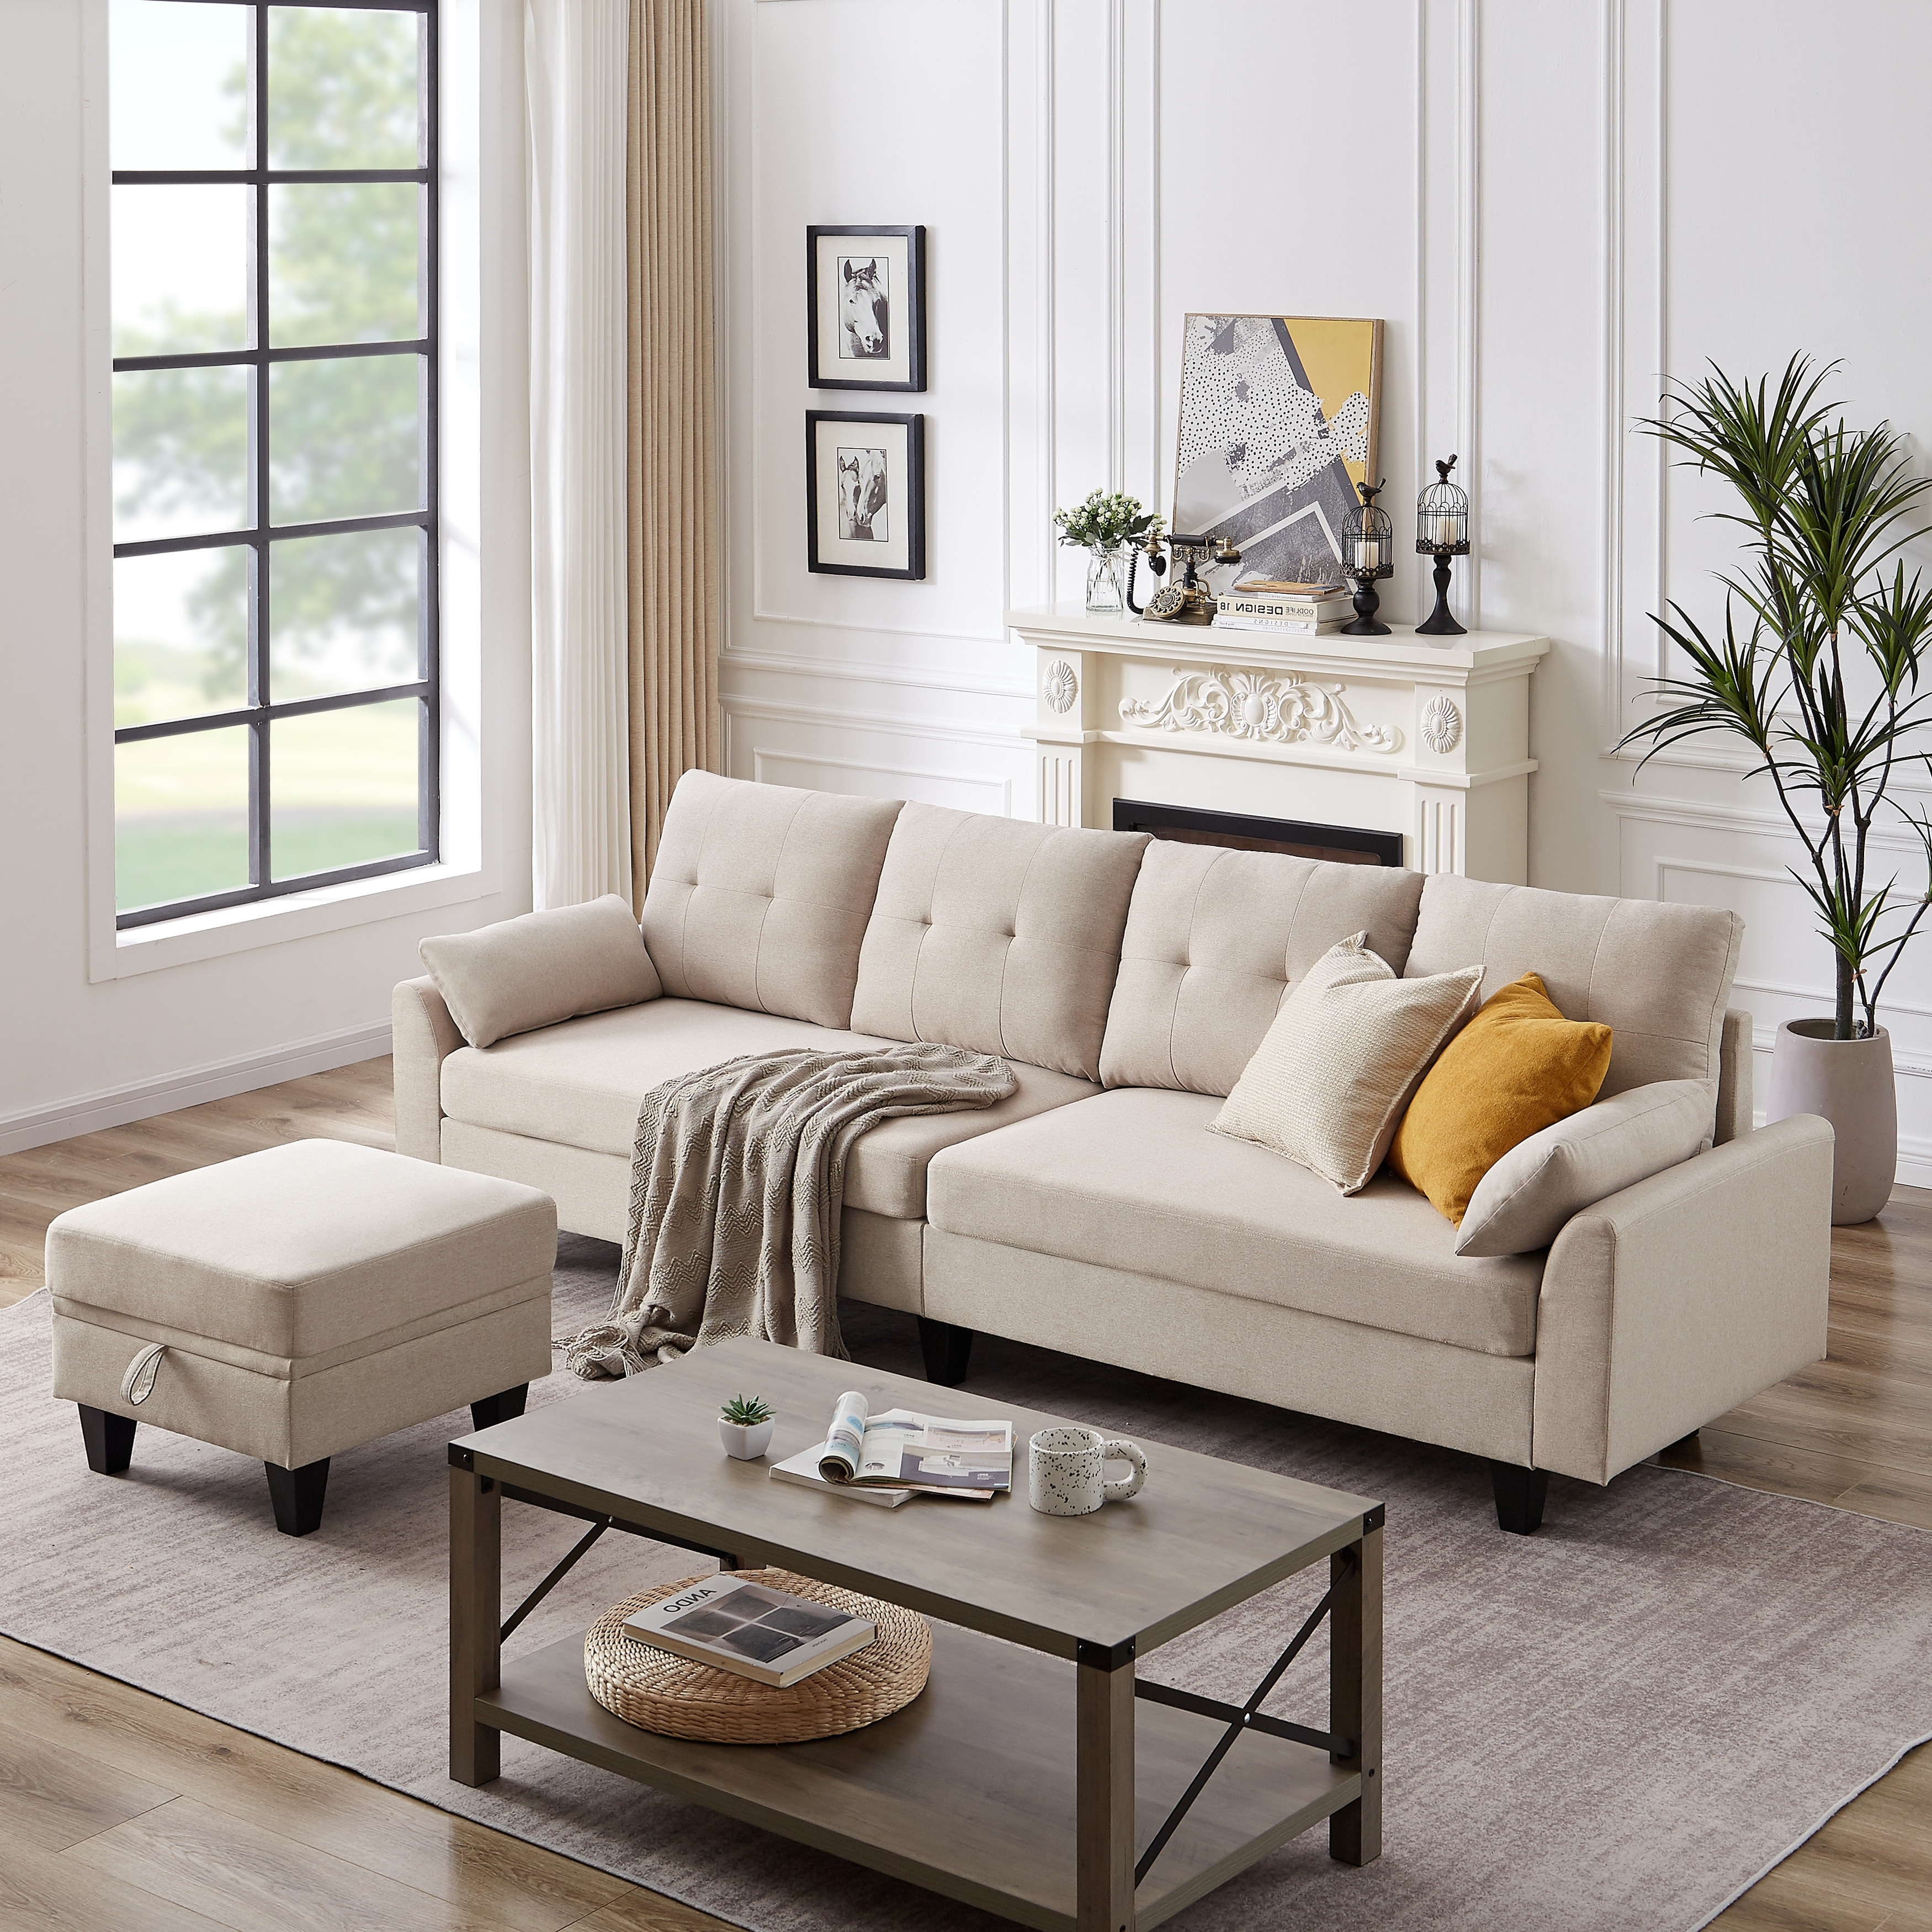 L shaped Sectional Sofa Designs For Your Home